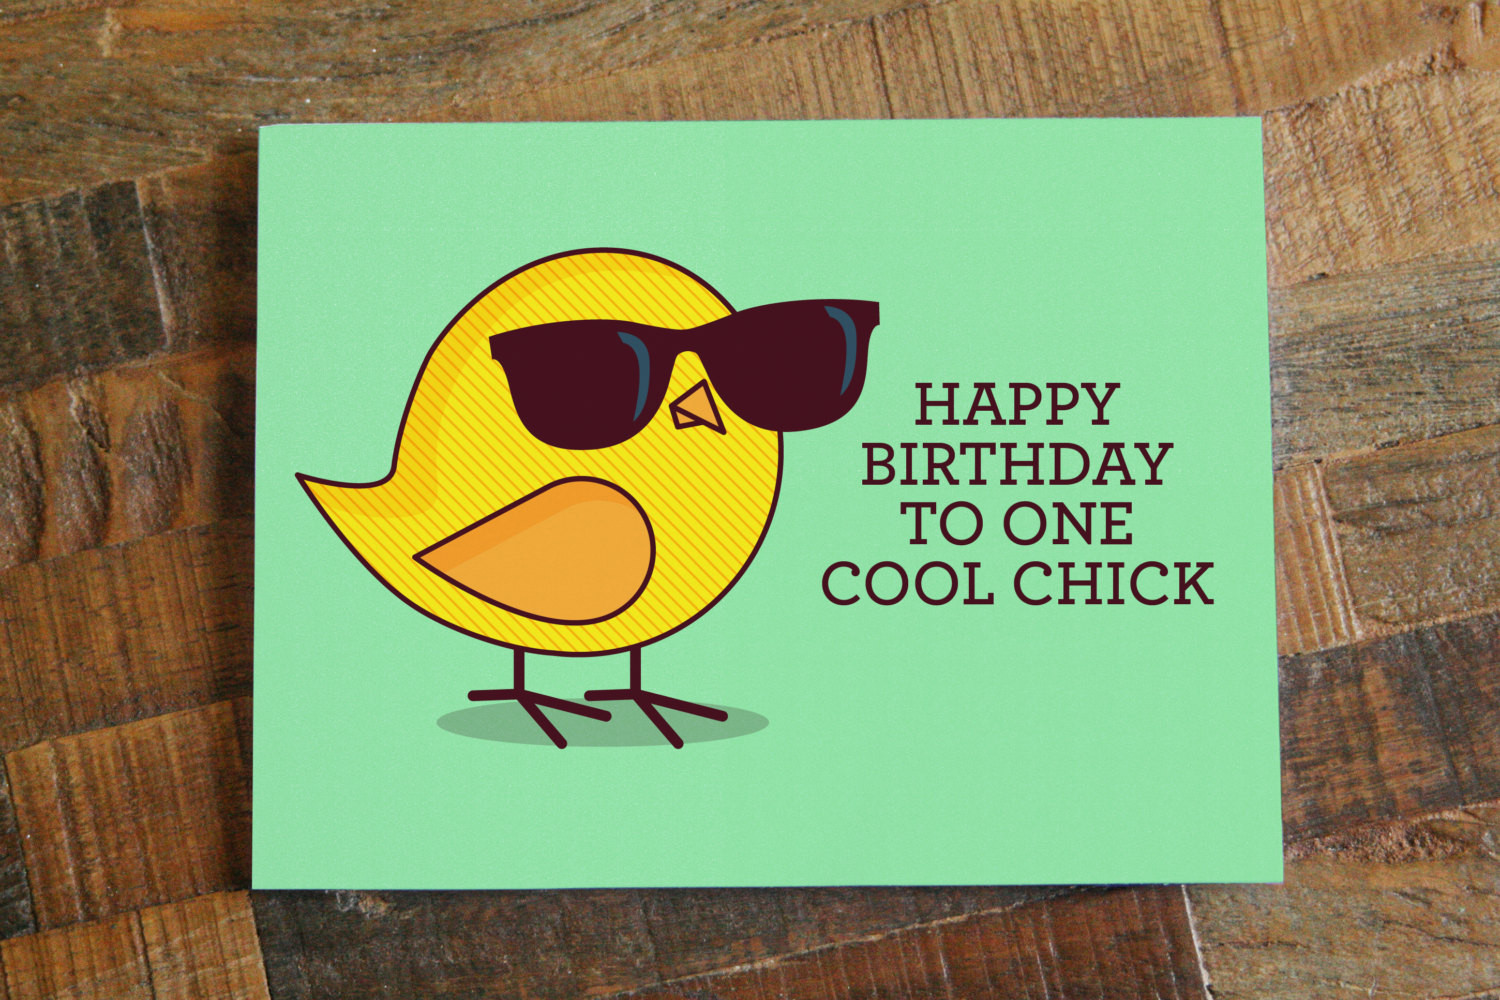 Birthday Wishes Funny Images
 Funny Birthday Card For Her "Happy Birthday to e Cool